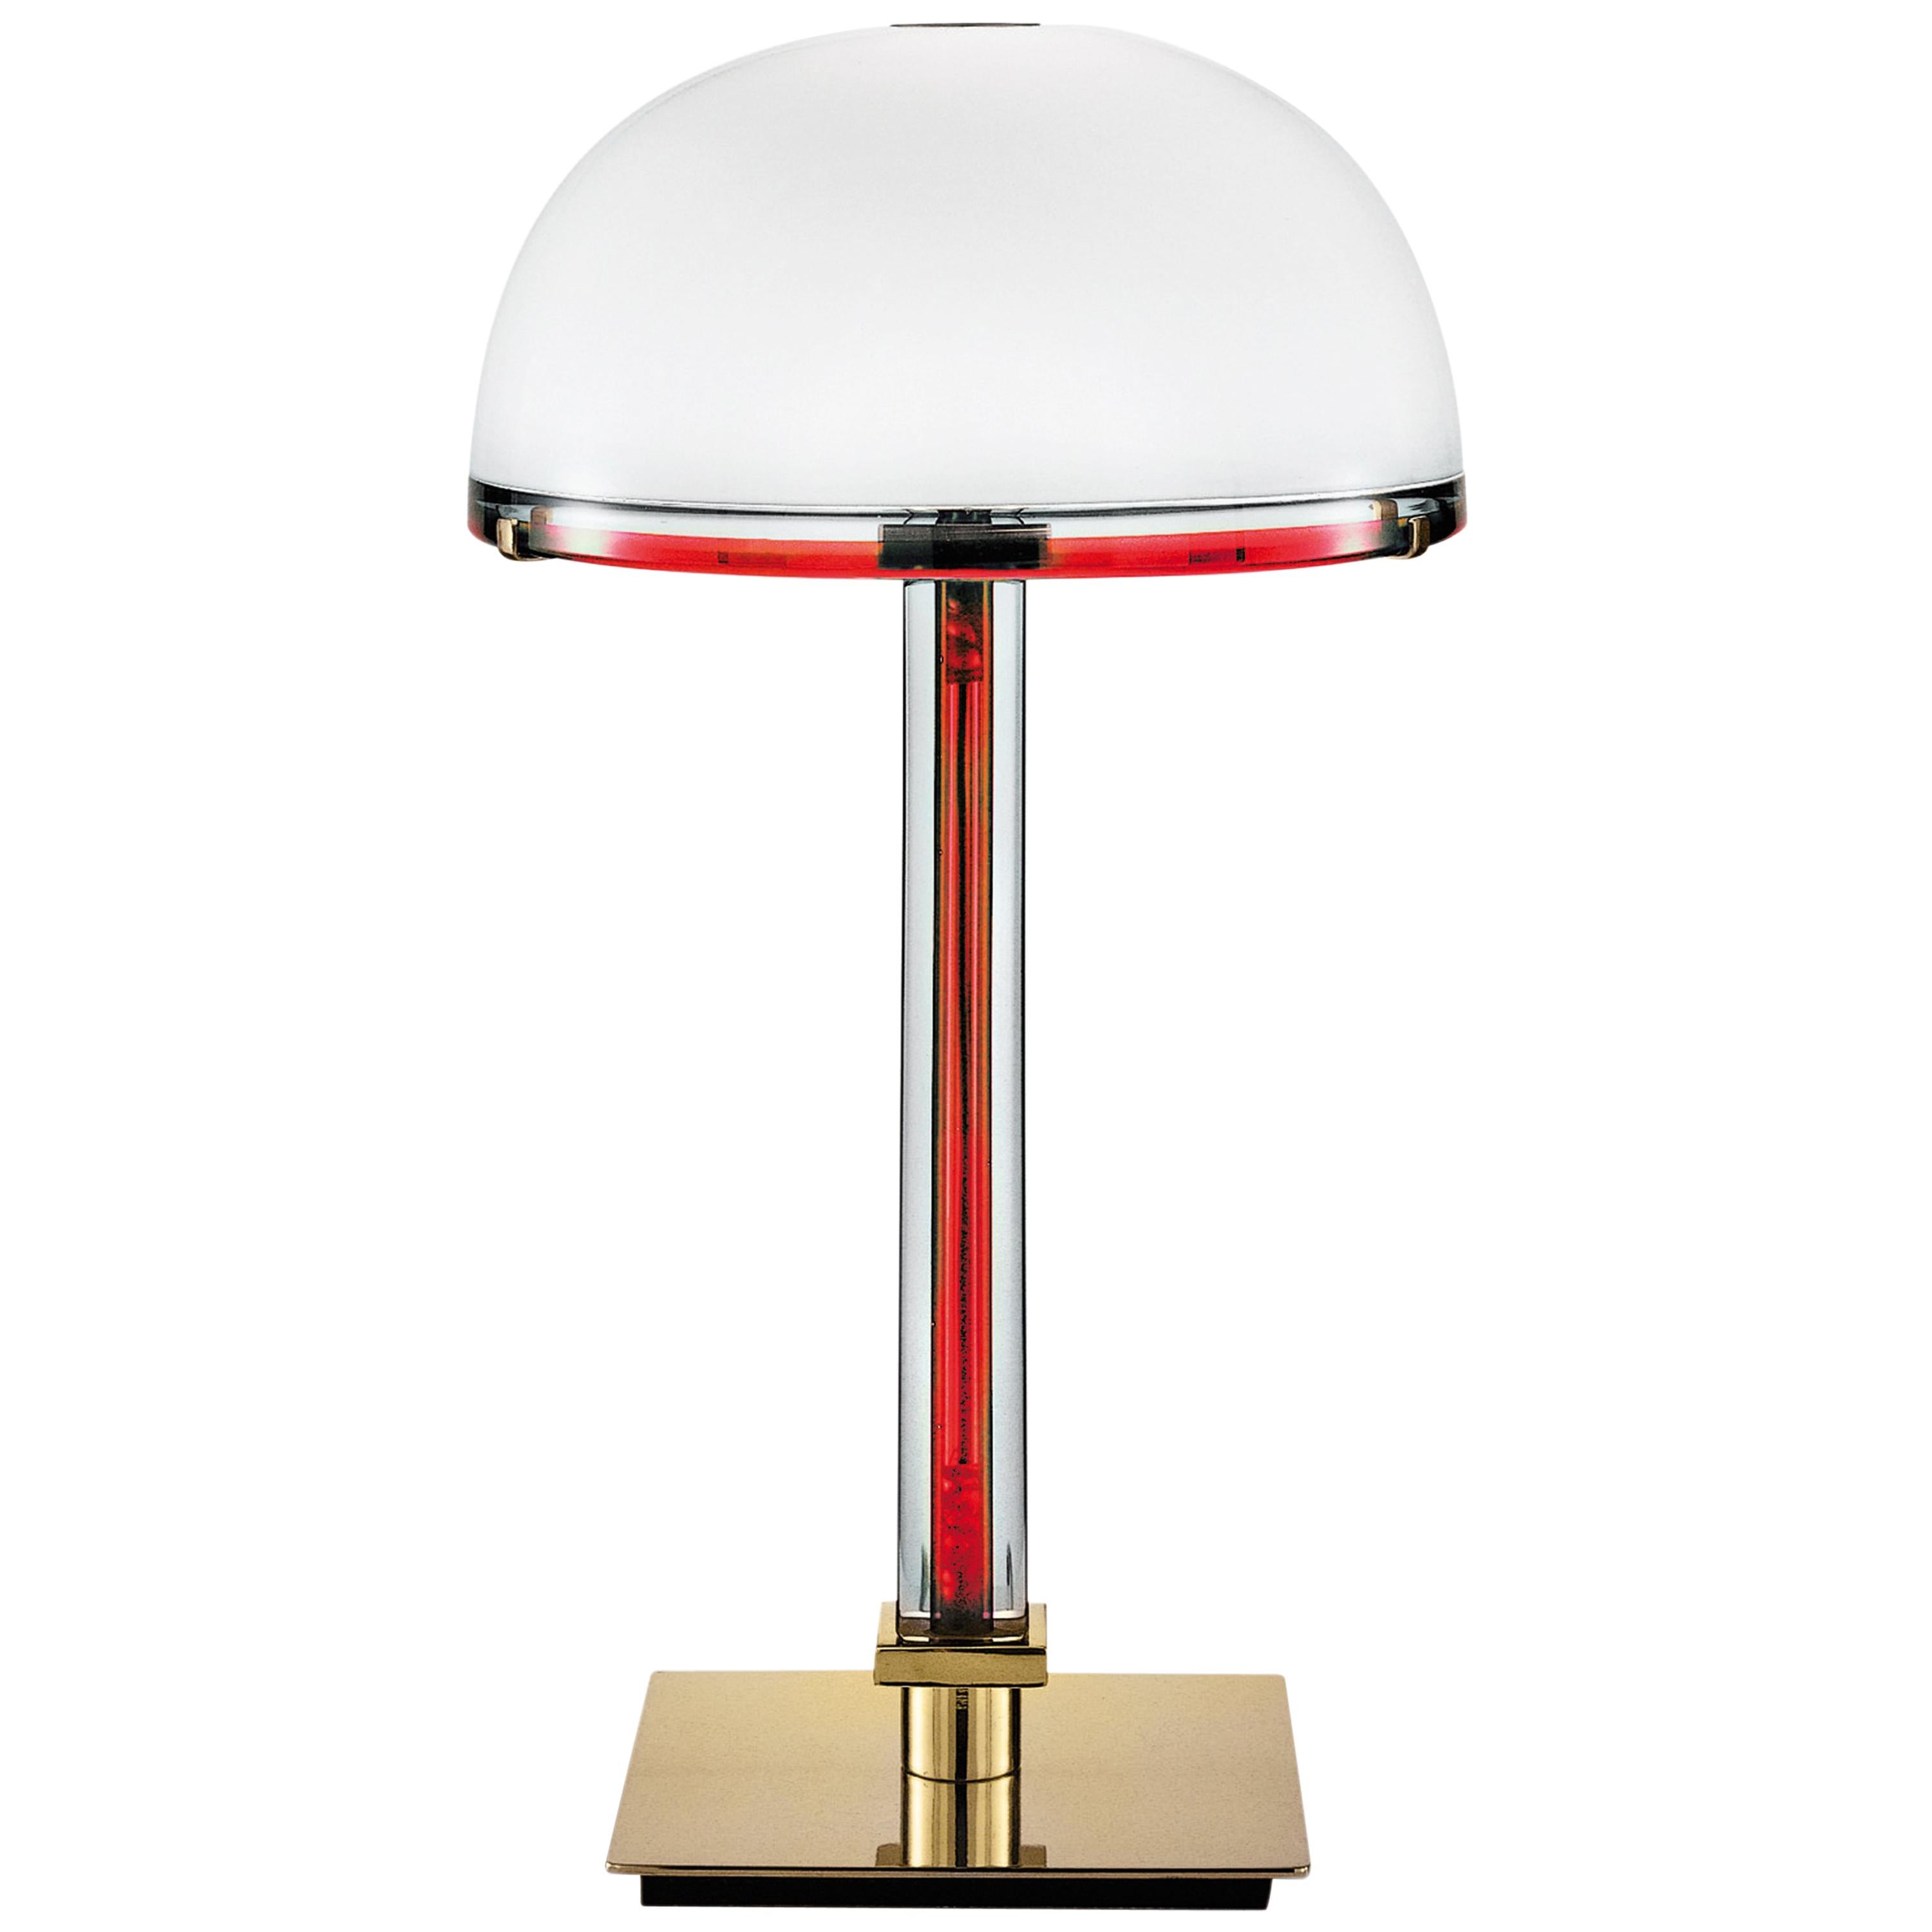 Venini Belboi Table Lamp in Milk White, Crystal, and Red with Gold Hardware For Sale